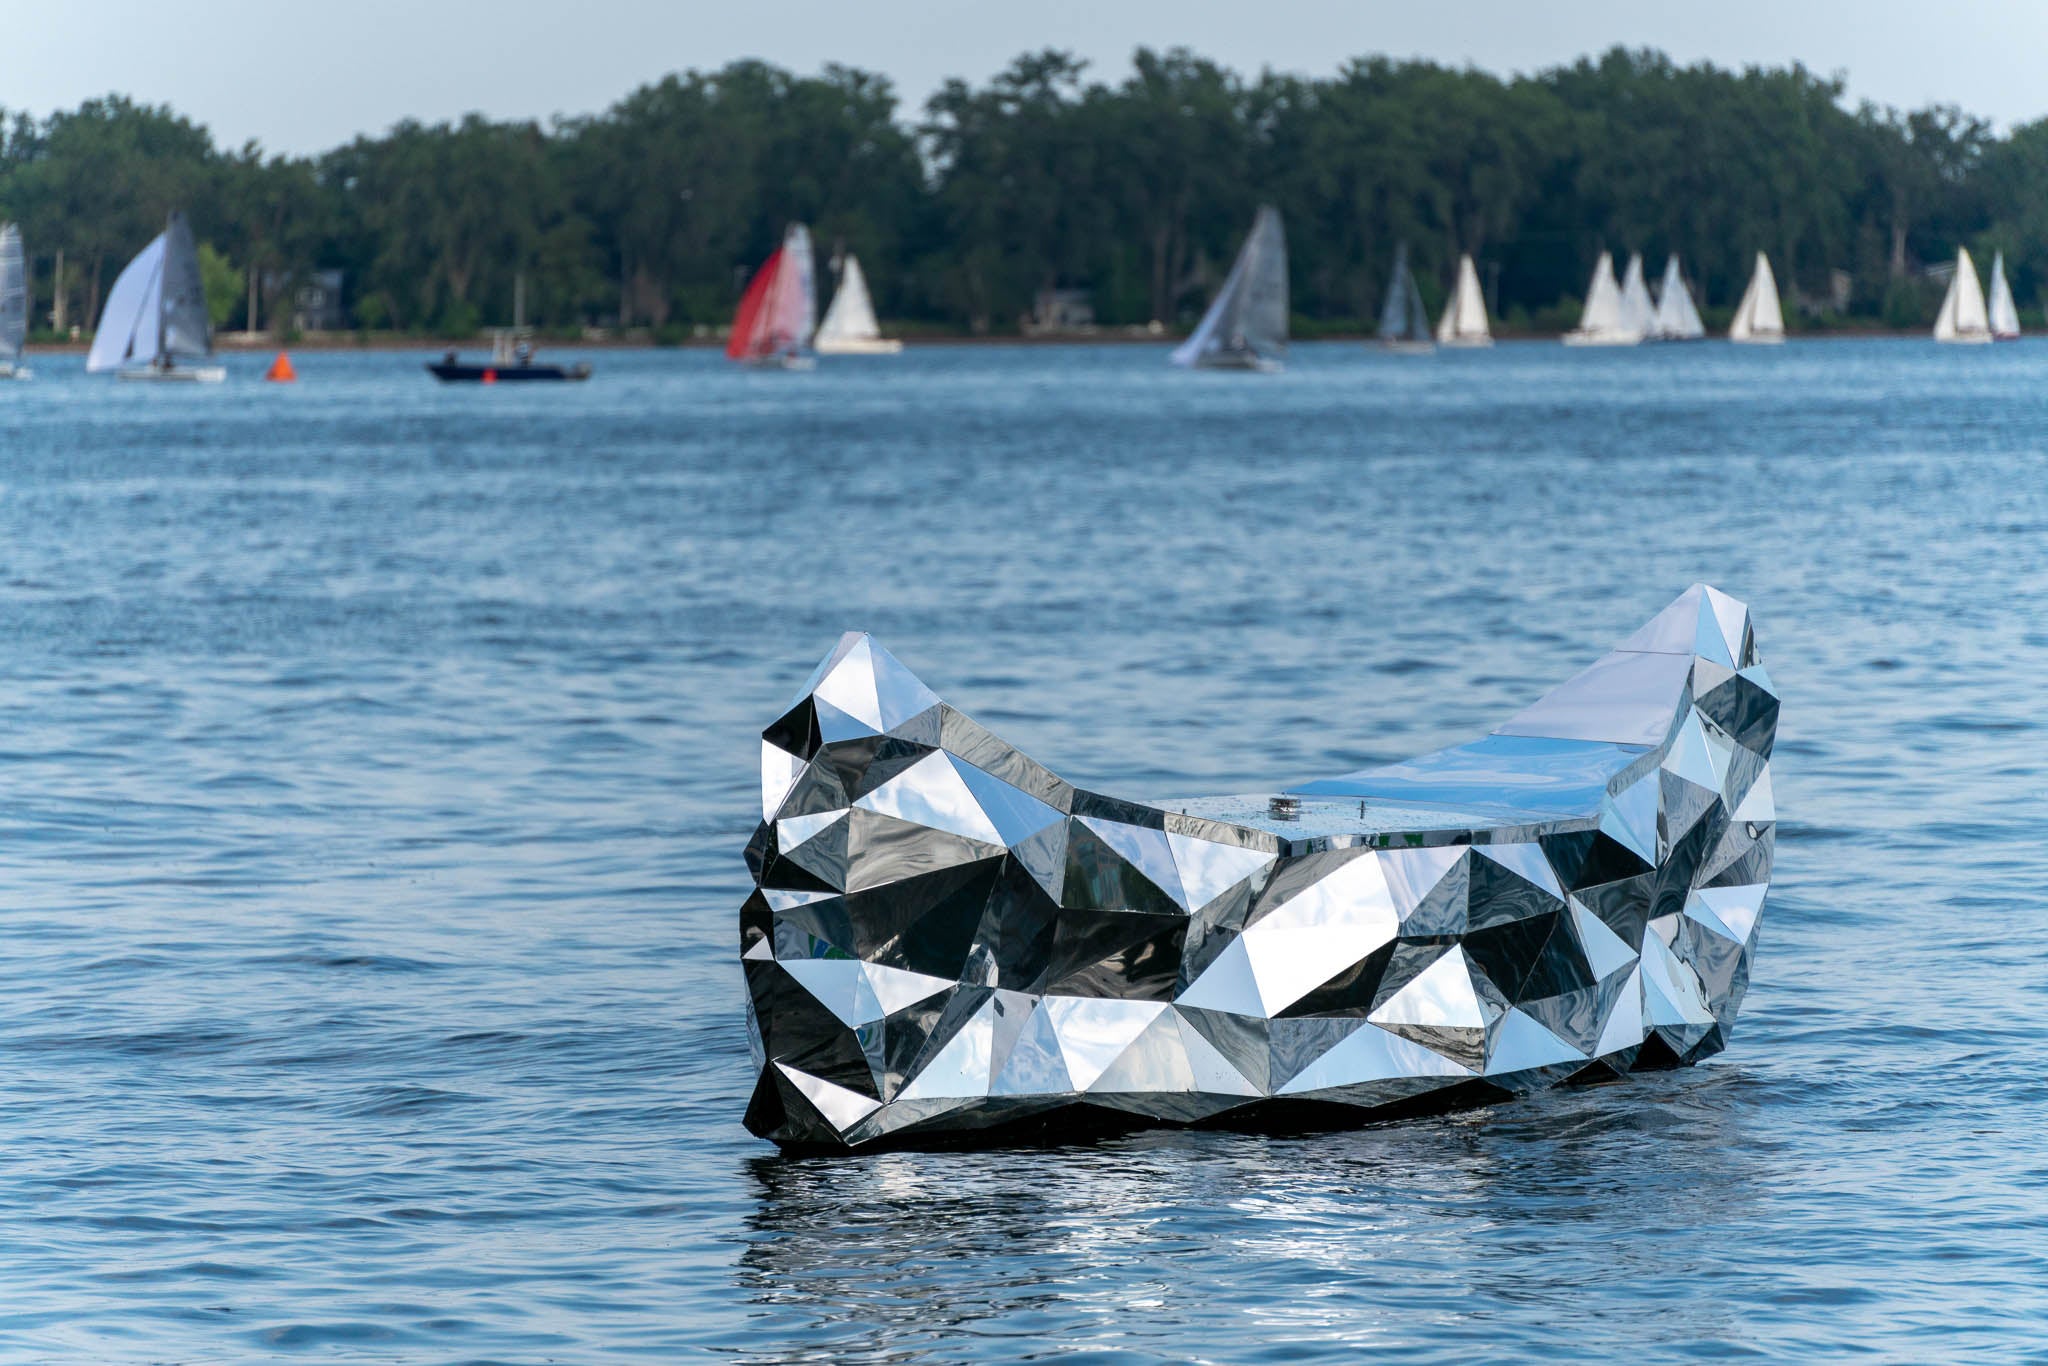 A mirrored canoe acts as a floating public art piece called Peacemakers Canoe.